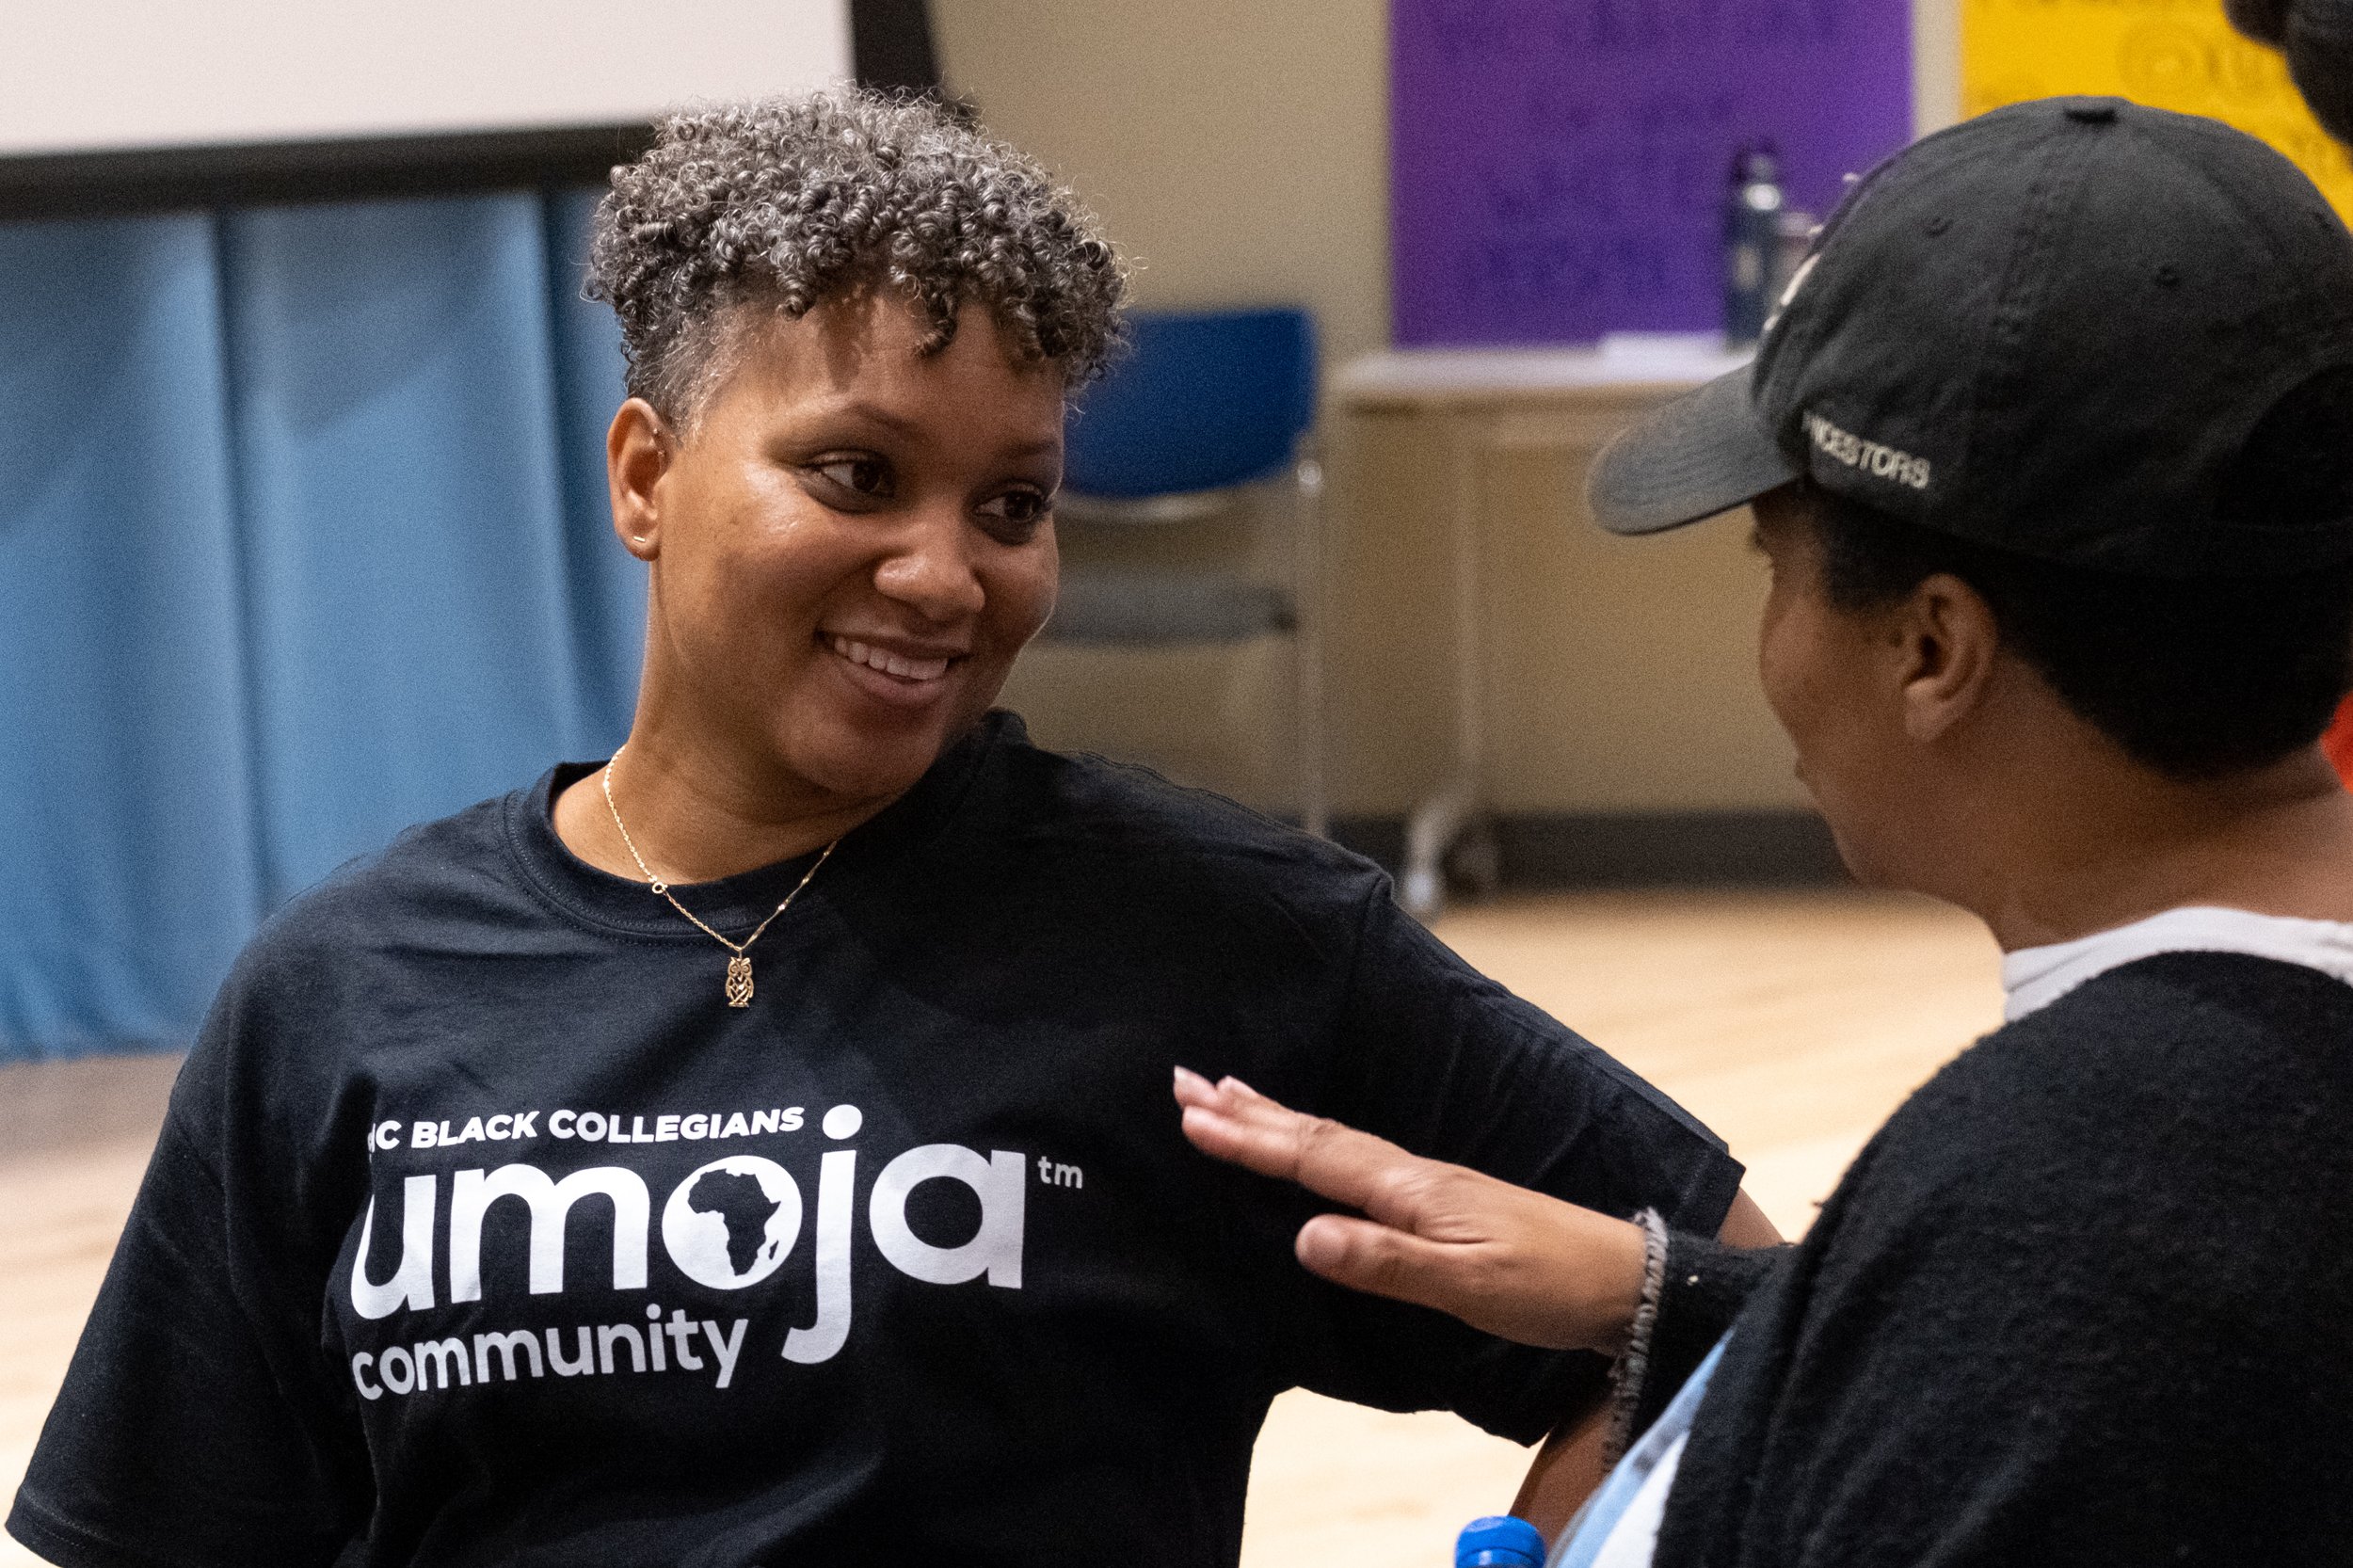  From L to R, Jocelyn Wynn and Nicole Woodard in conversation and community at the community gathering in lieu of a protest against the play "By The River Rivanna" in the Student Services Orientation Hall on the main campus at Santa Monica College in